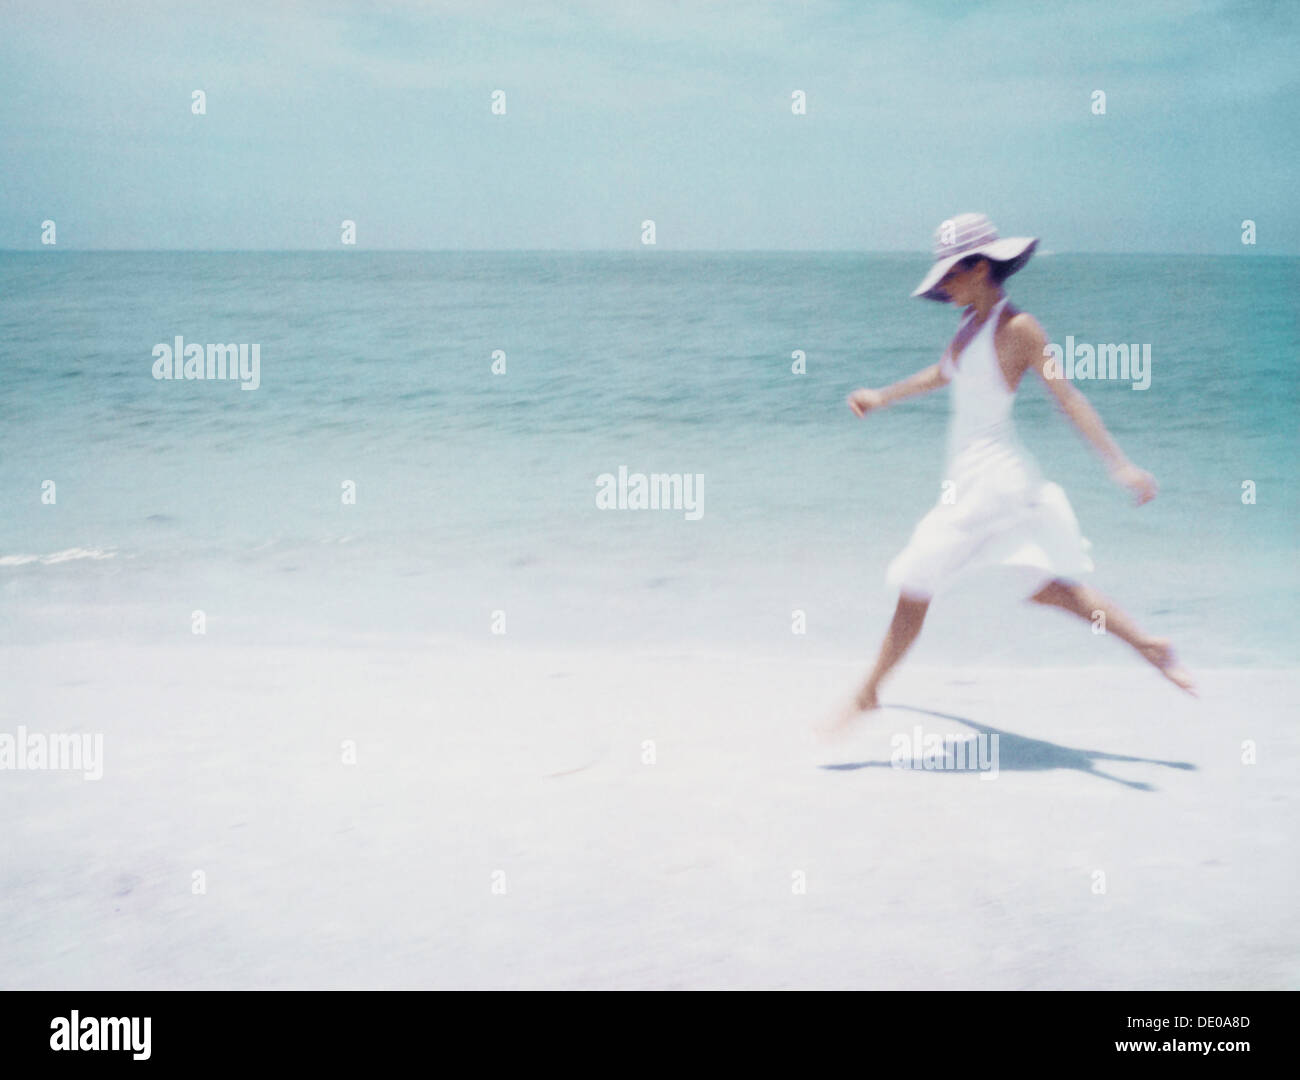 Young woman in dress and sun hat, running on beach, side view Stock Photo